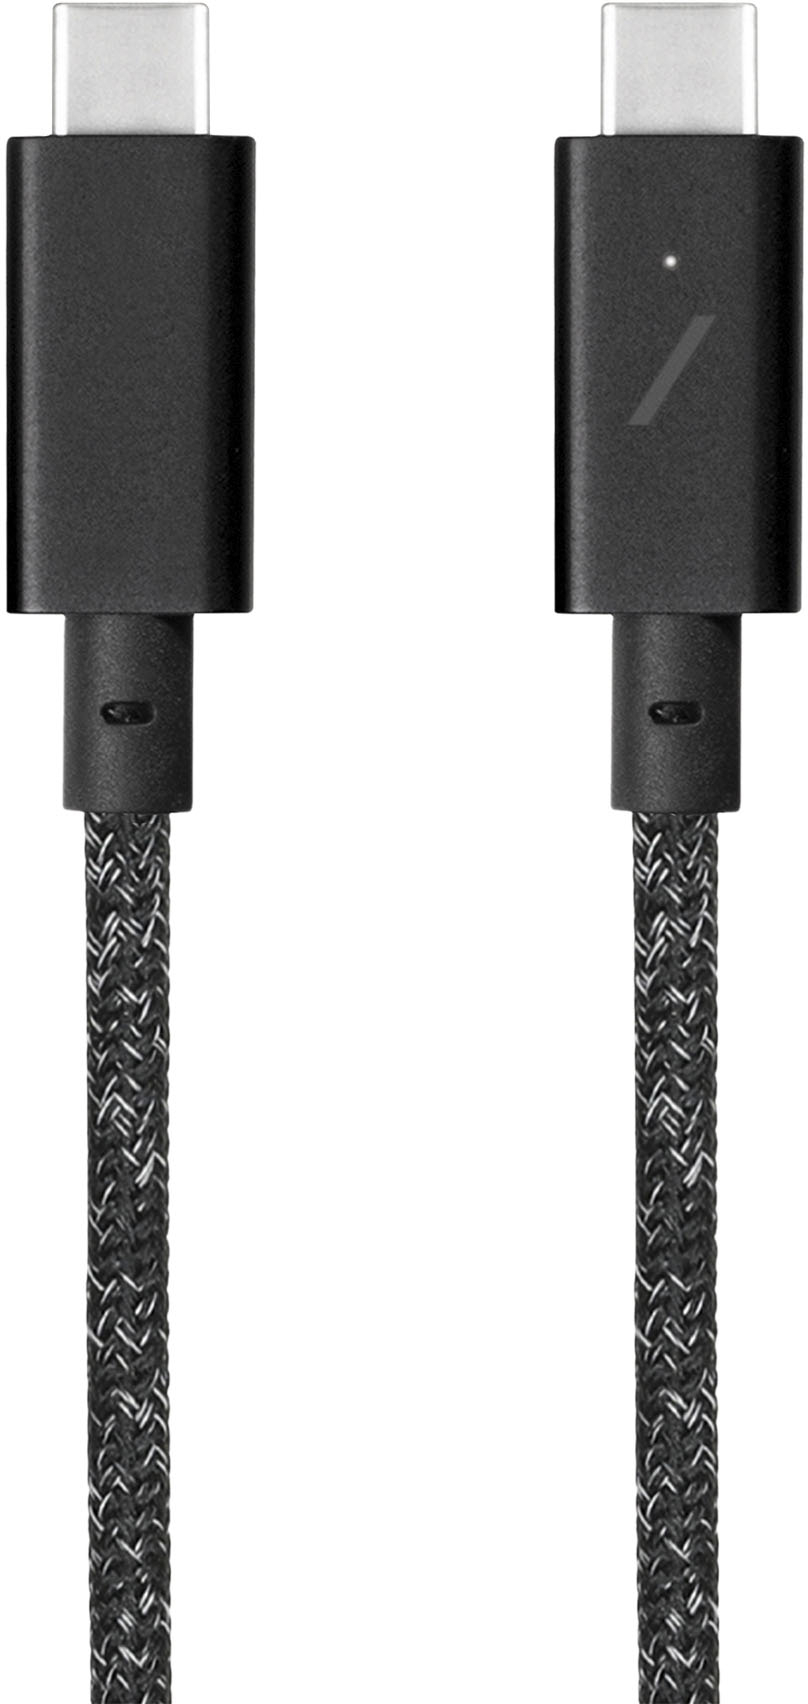 Angle View: Cygnett - Armored Lightning to USB Charge and Sync Cable (9 Feet) - Black